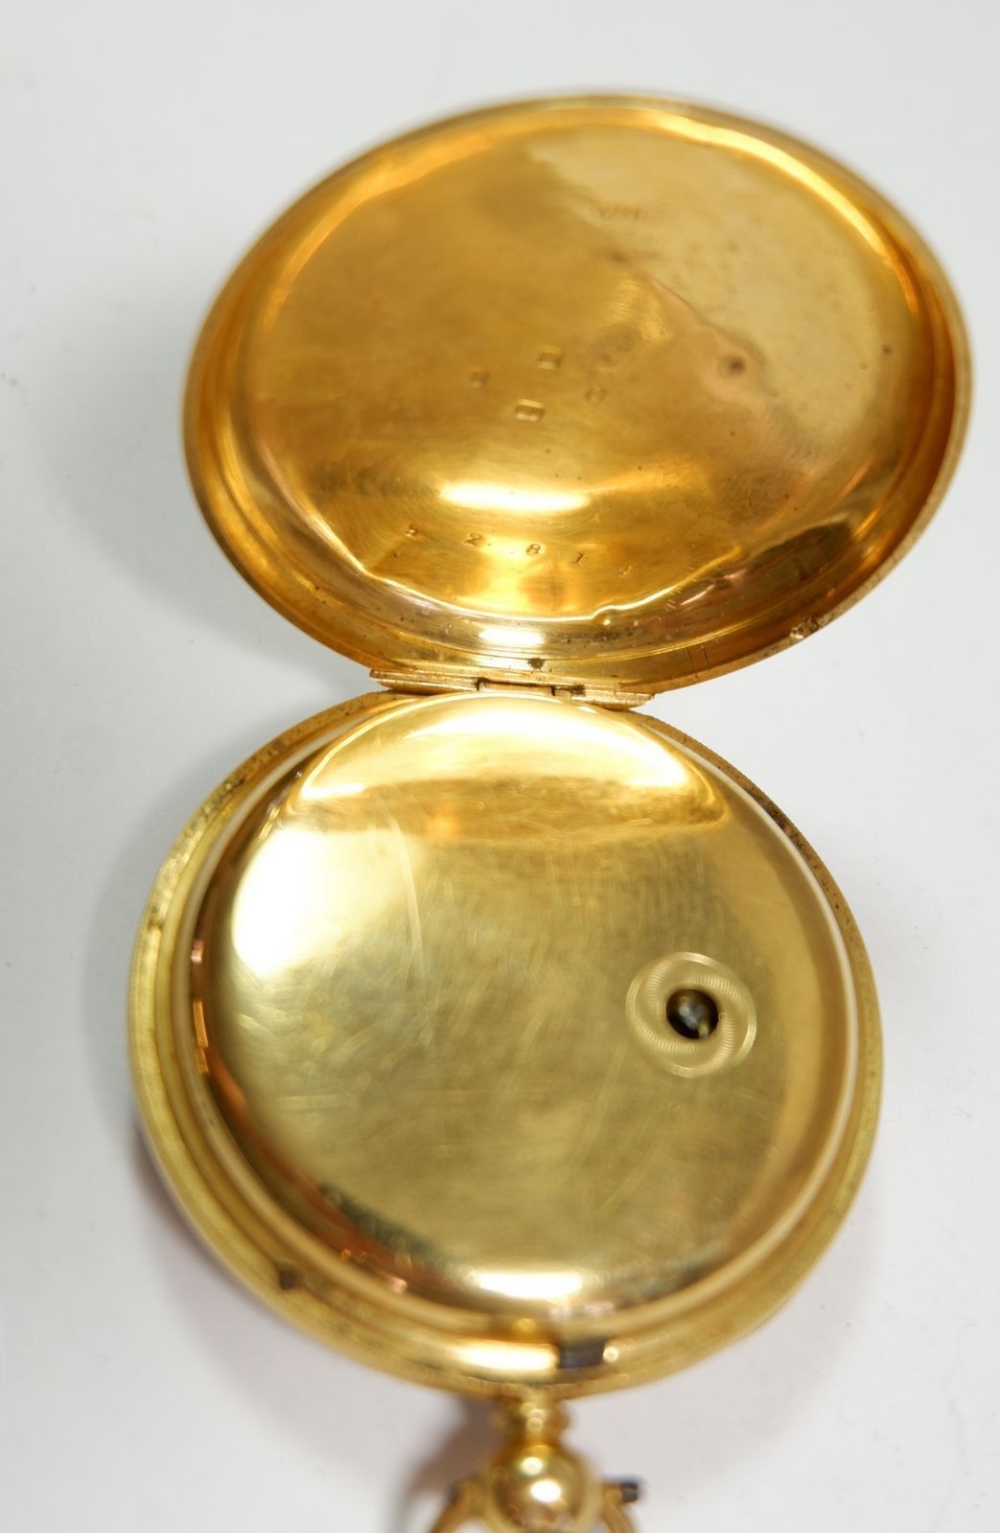 An 18 carat gold pocket watch with enamel face and seconds dial marked 52814, 4.5cm diameter - Image 2 of 3